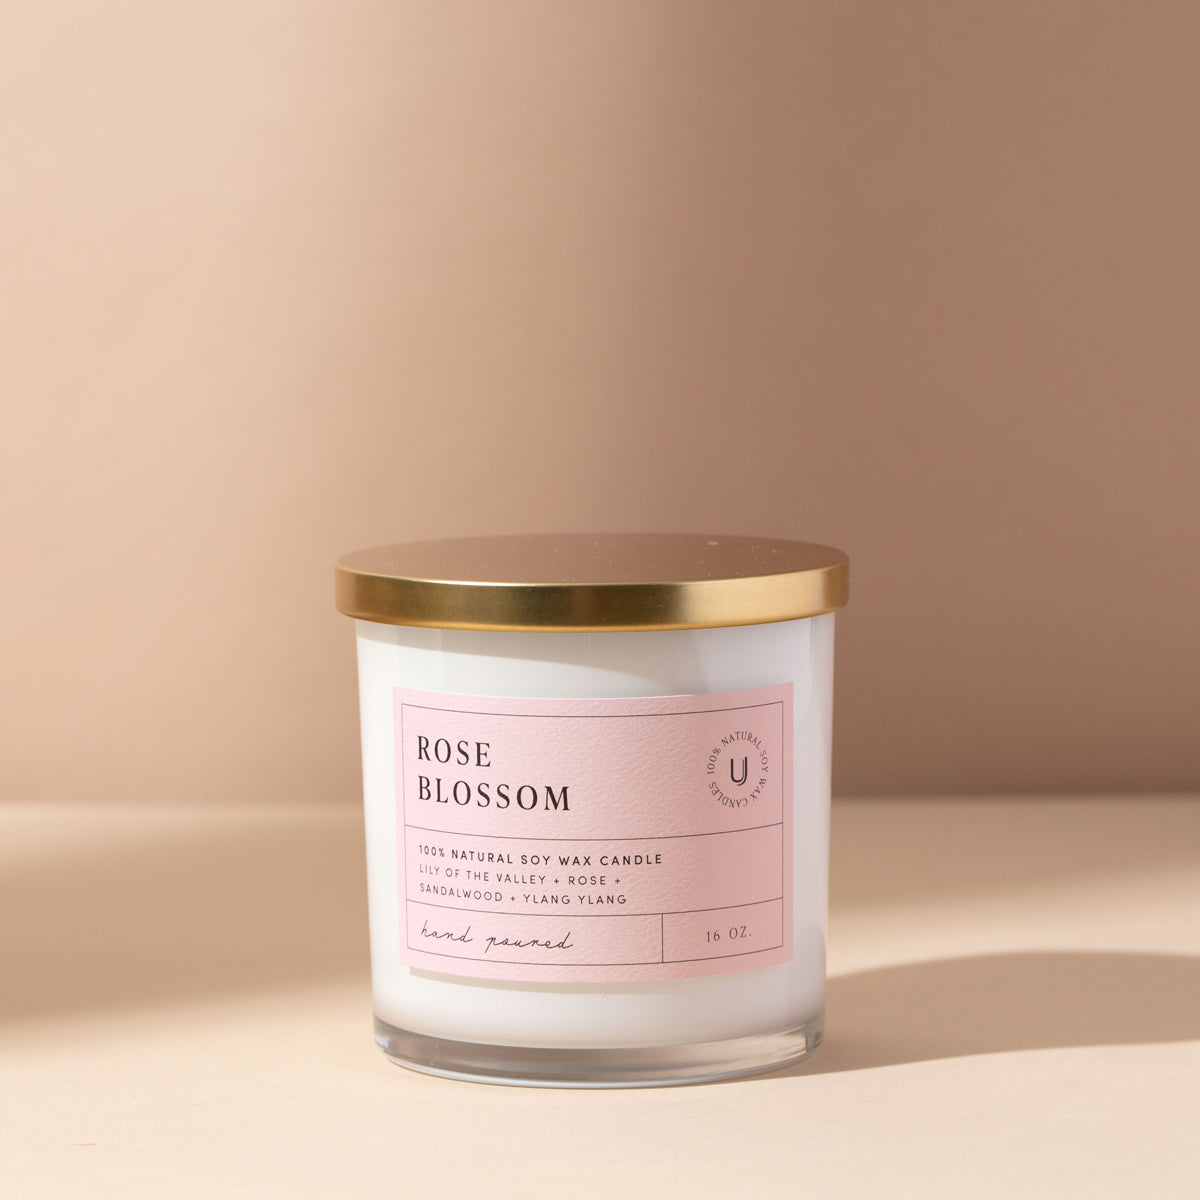 Rose Blossom Candle | 16 OZ | Product Detail Image | Uncommon James Home